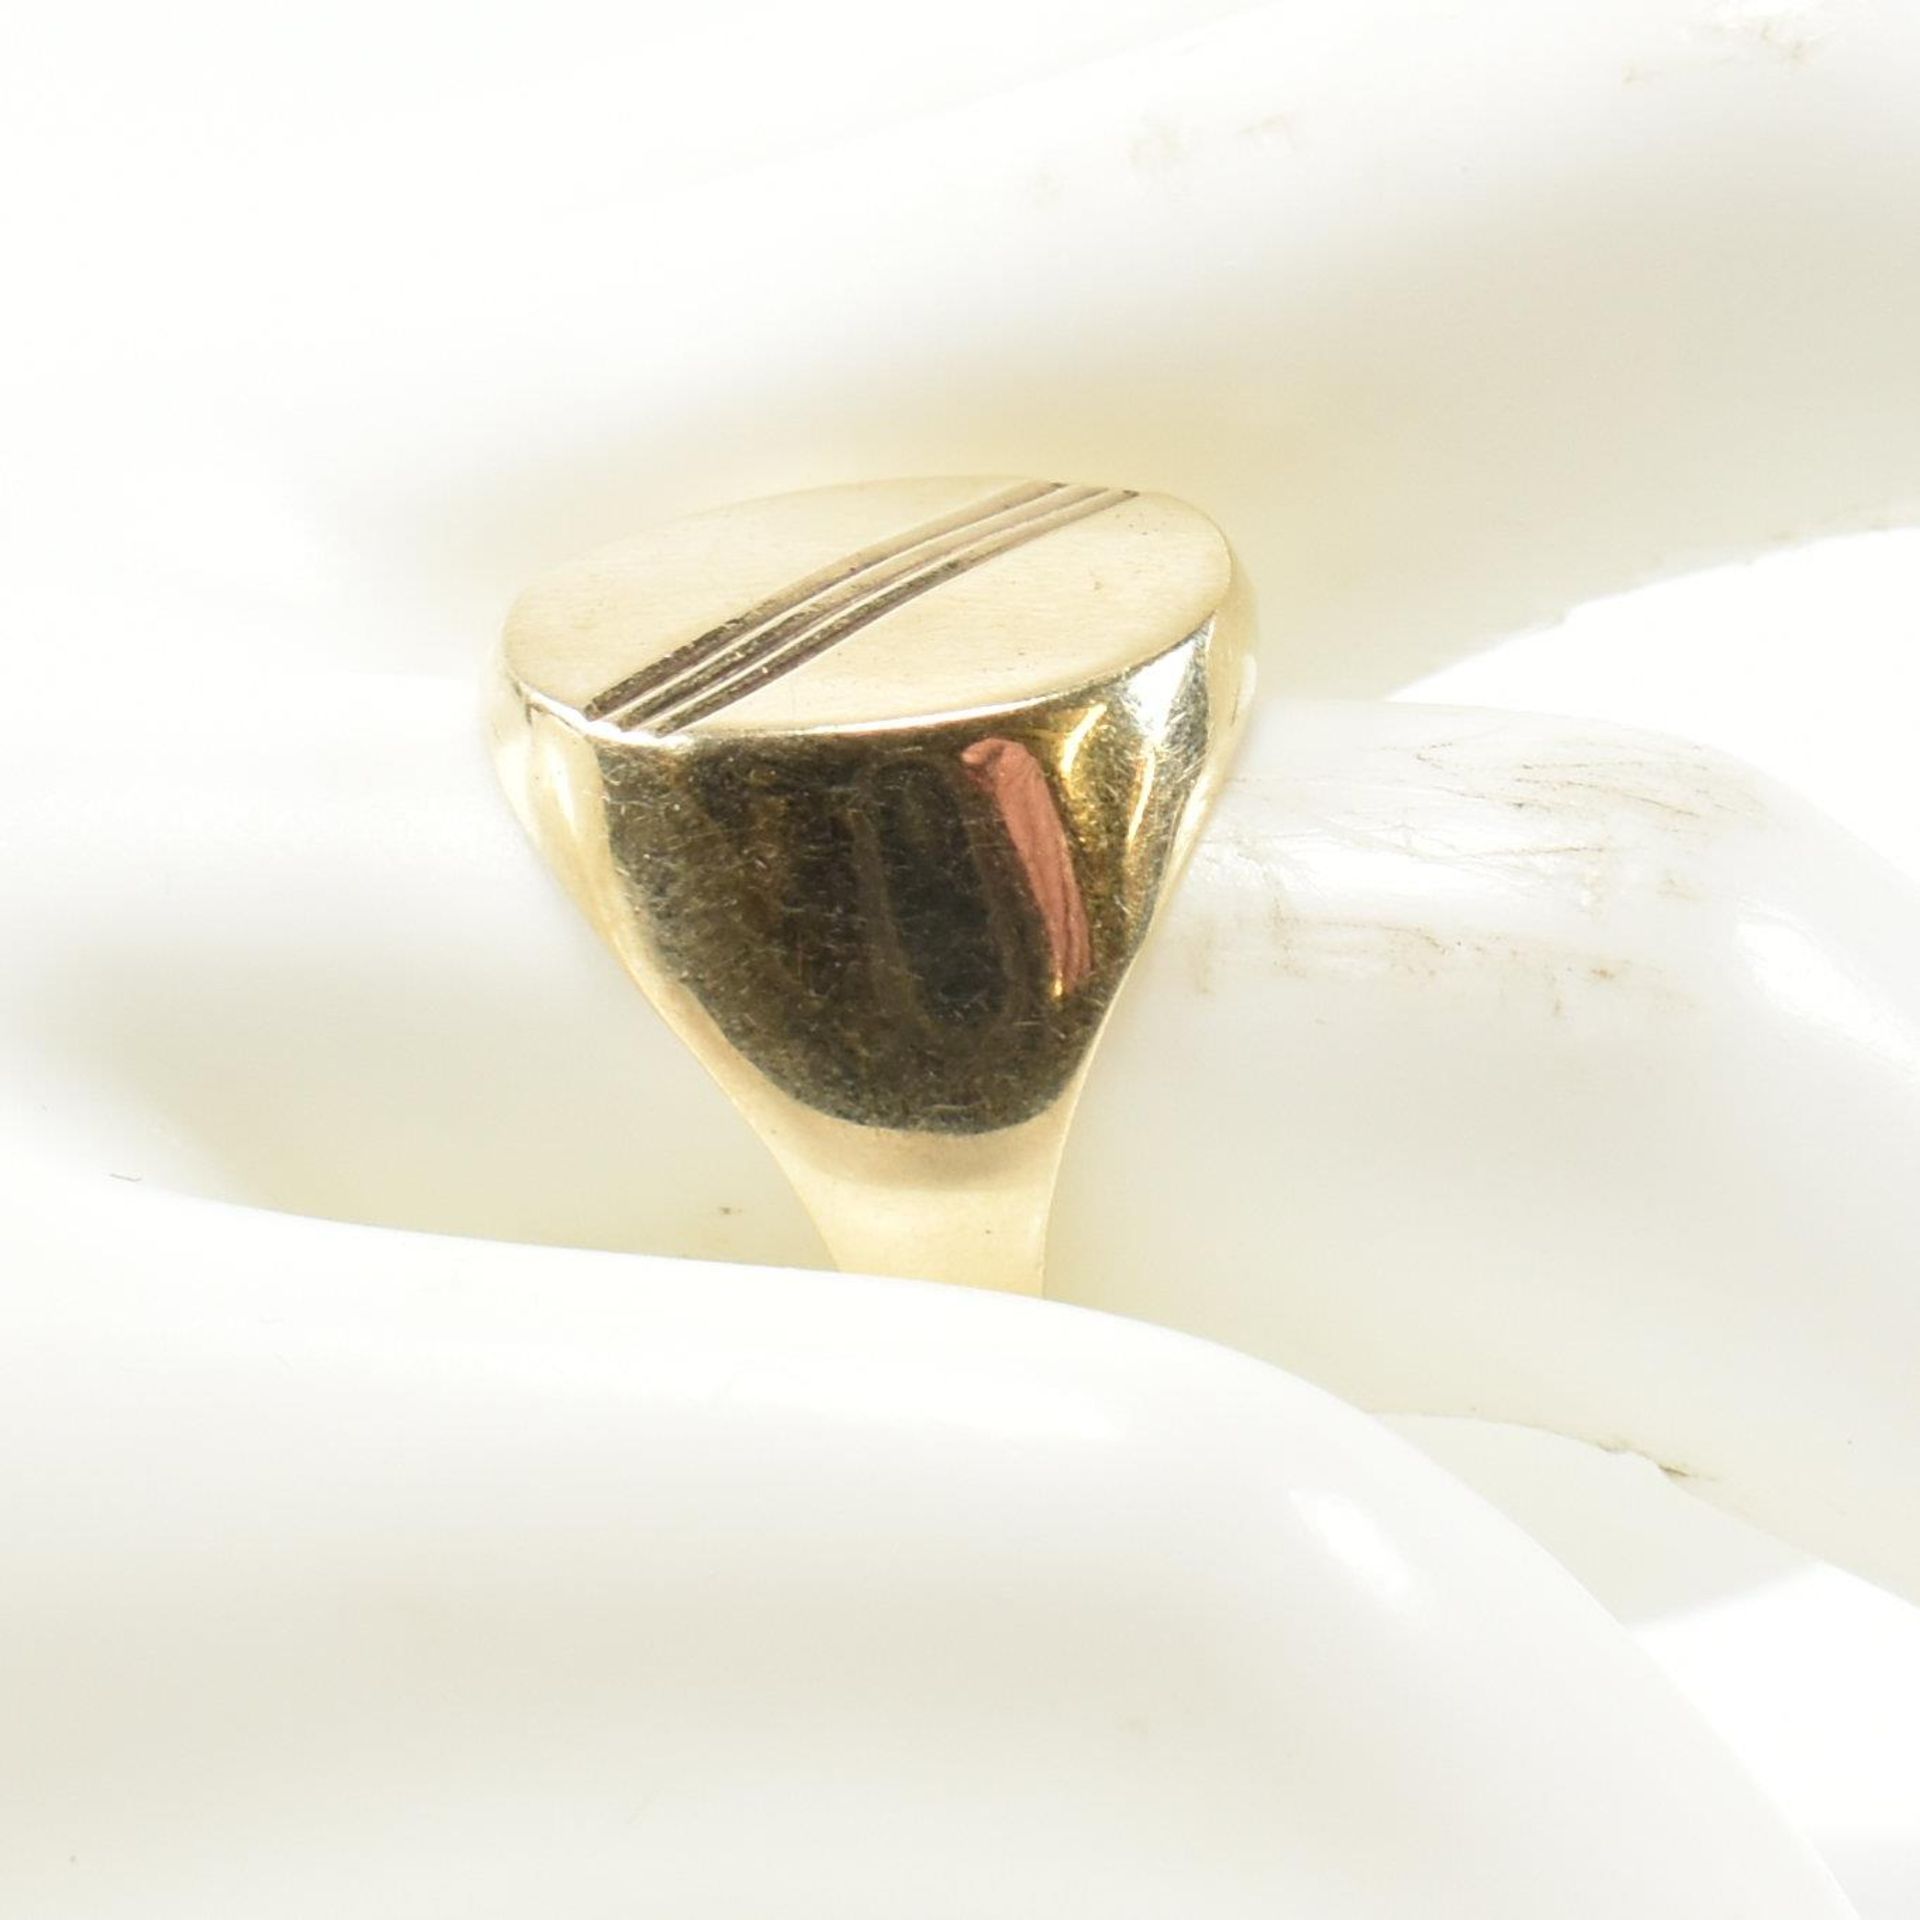 9CT GOLD OVAL SIGNET RING - Image 6 of 6